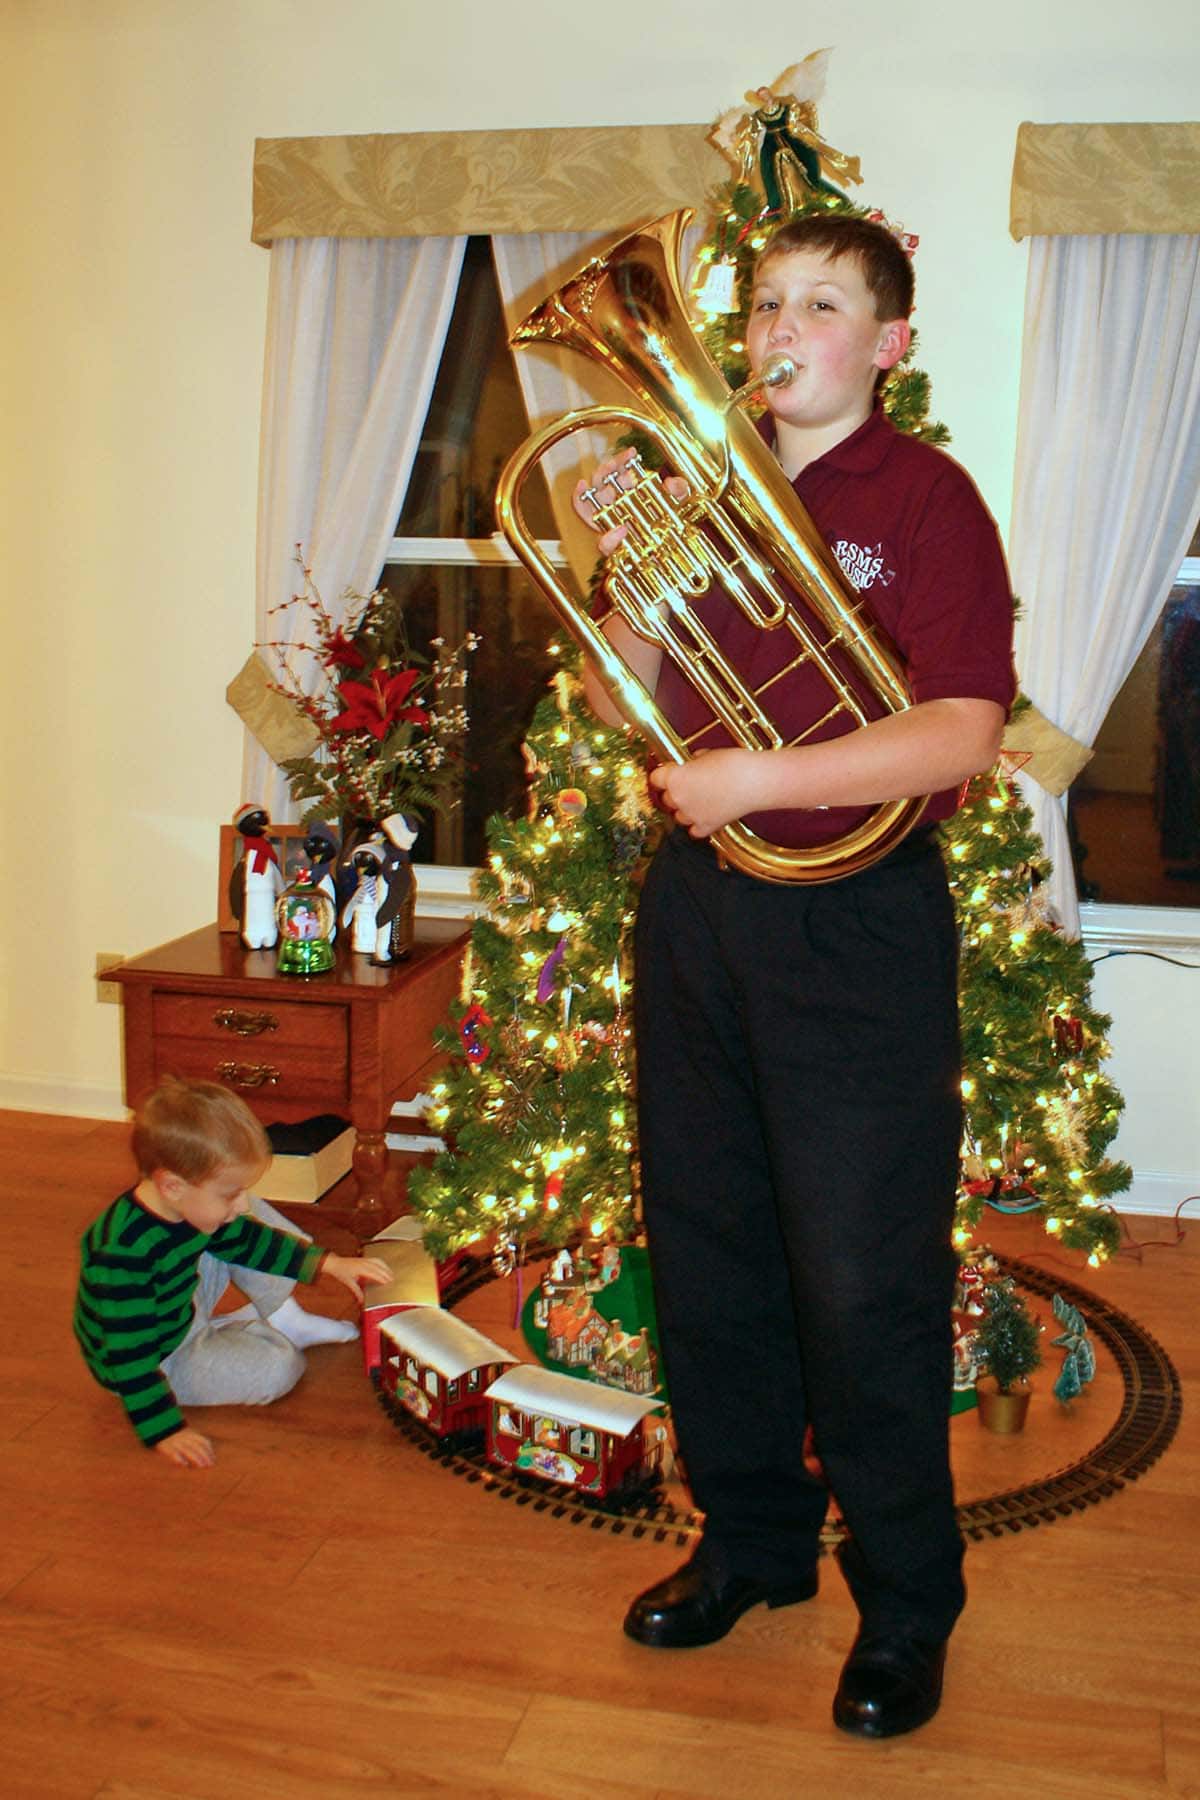 Kid in school polo with brass baritone horn in from of a Christmas tree.